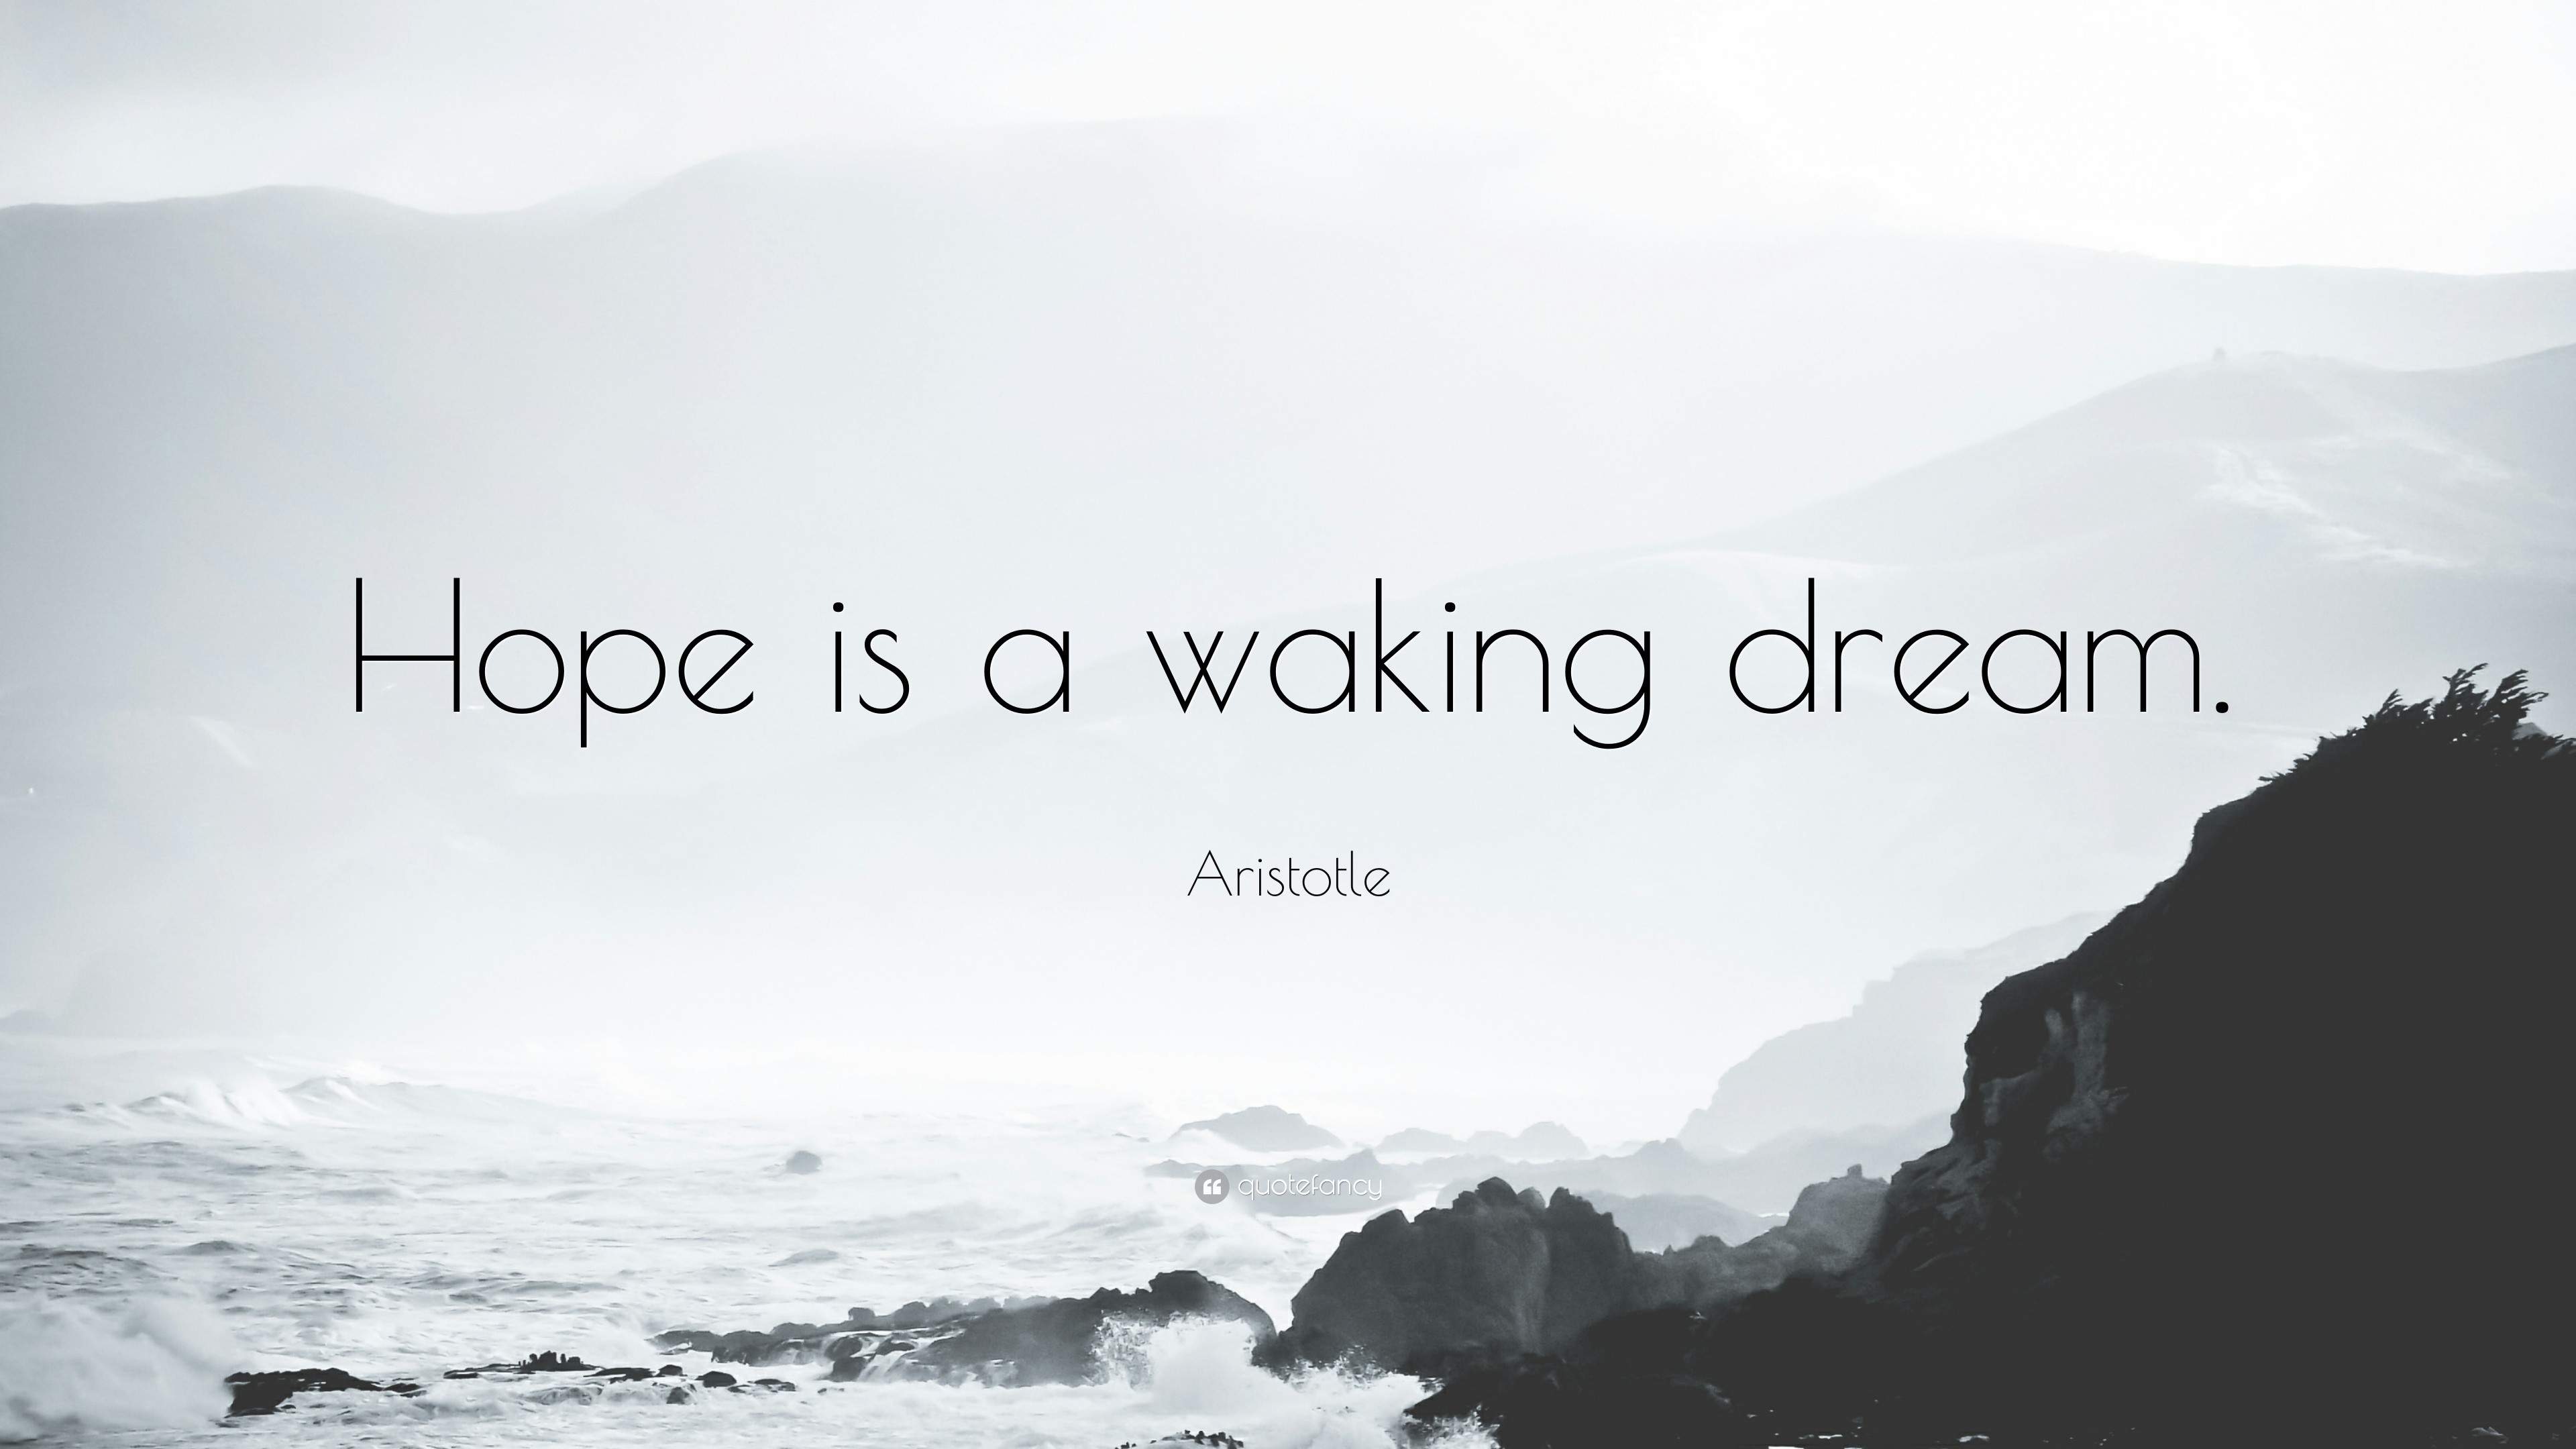 Best Motivational Wallpapers with Inspiring Quotes